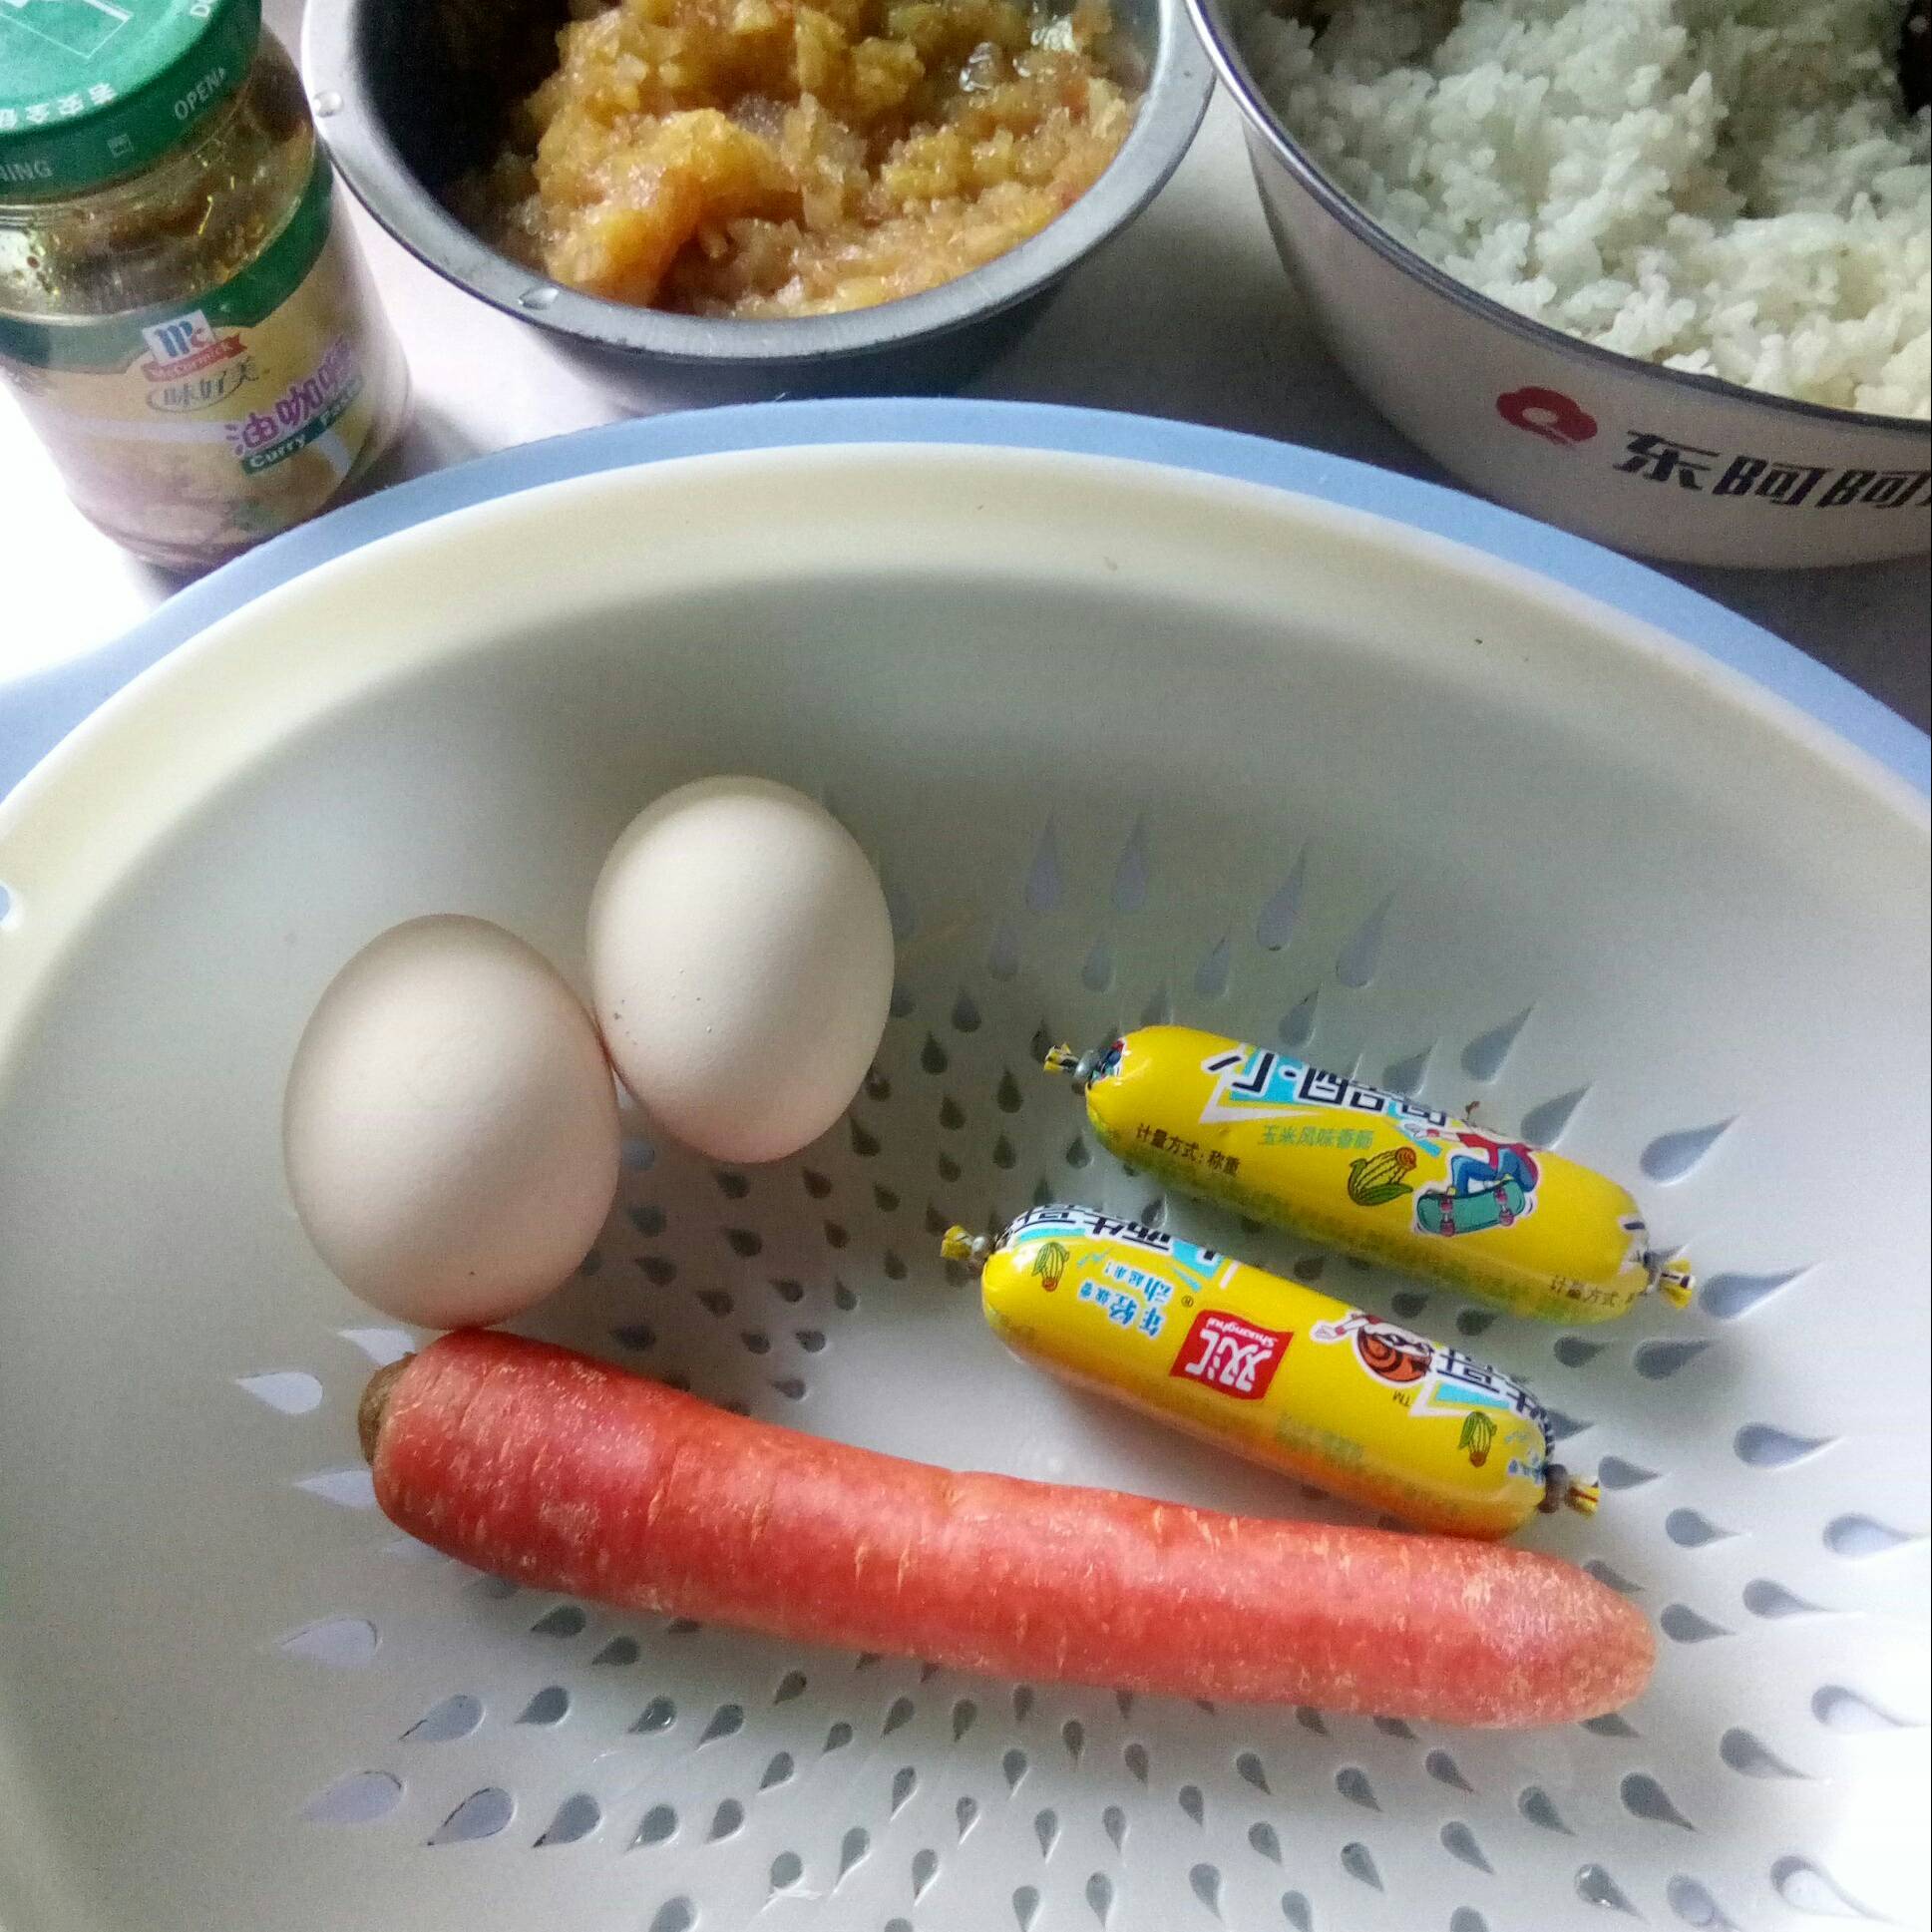 Curry Pineapple Egg Fried Rice recipe